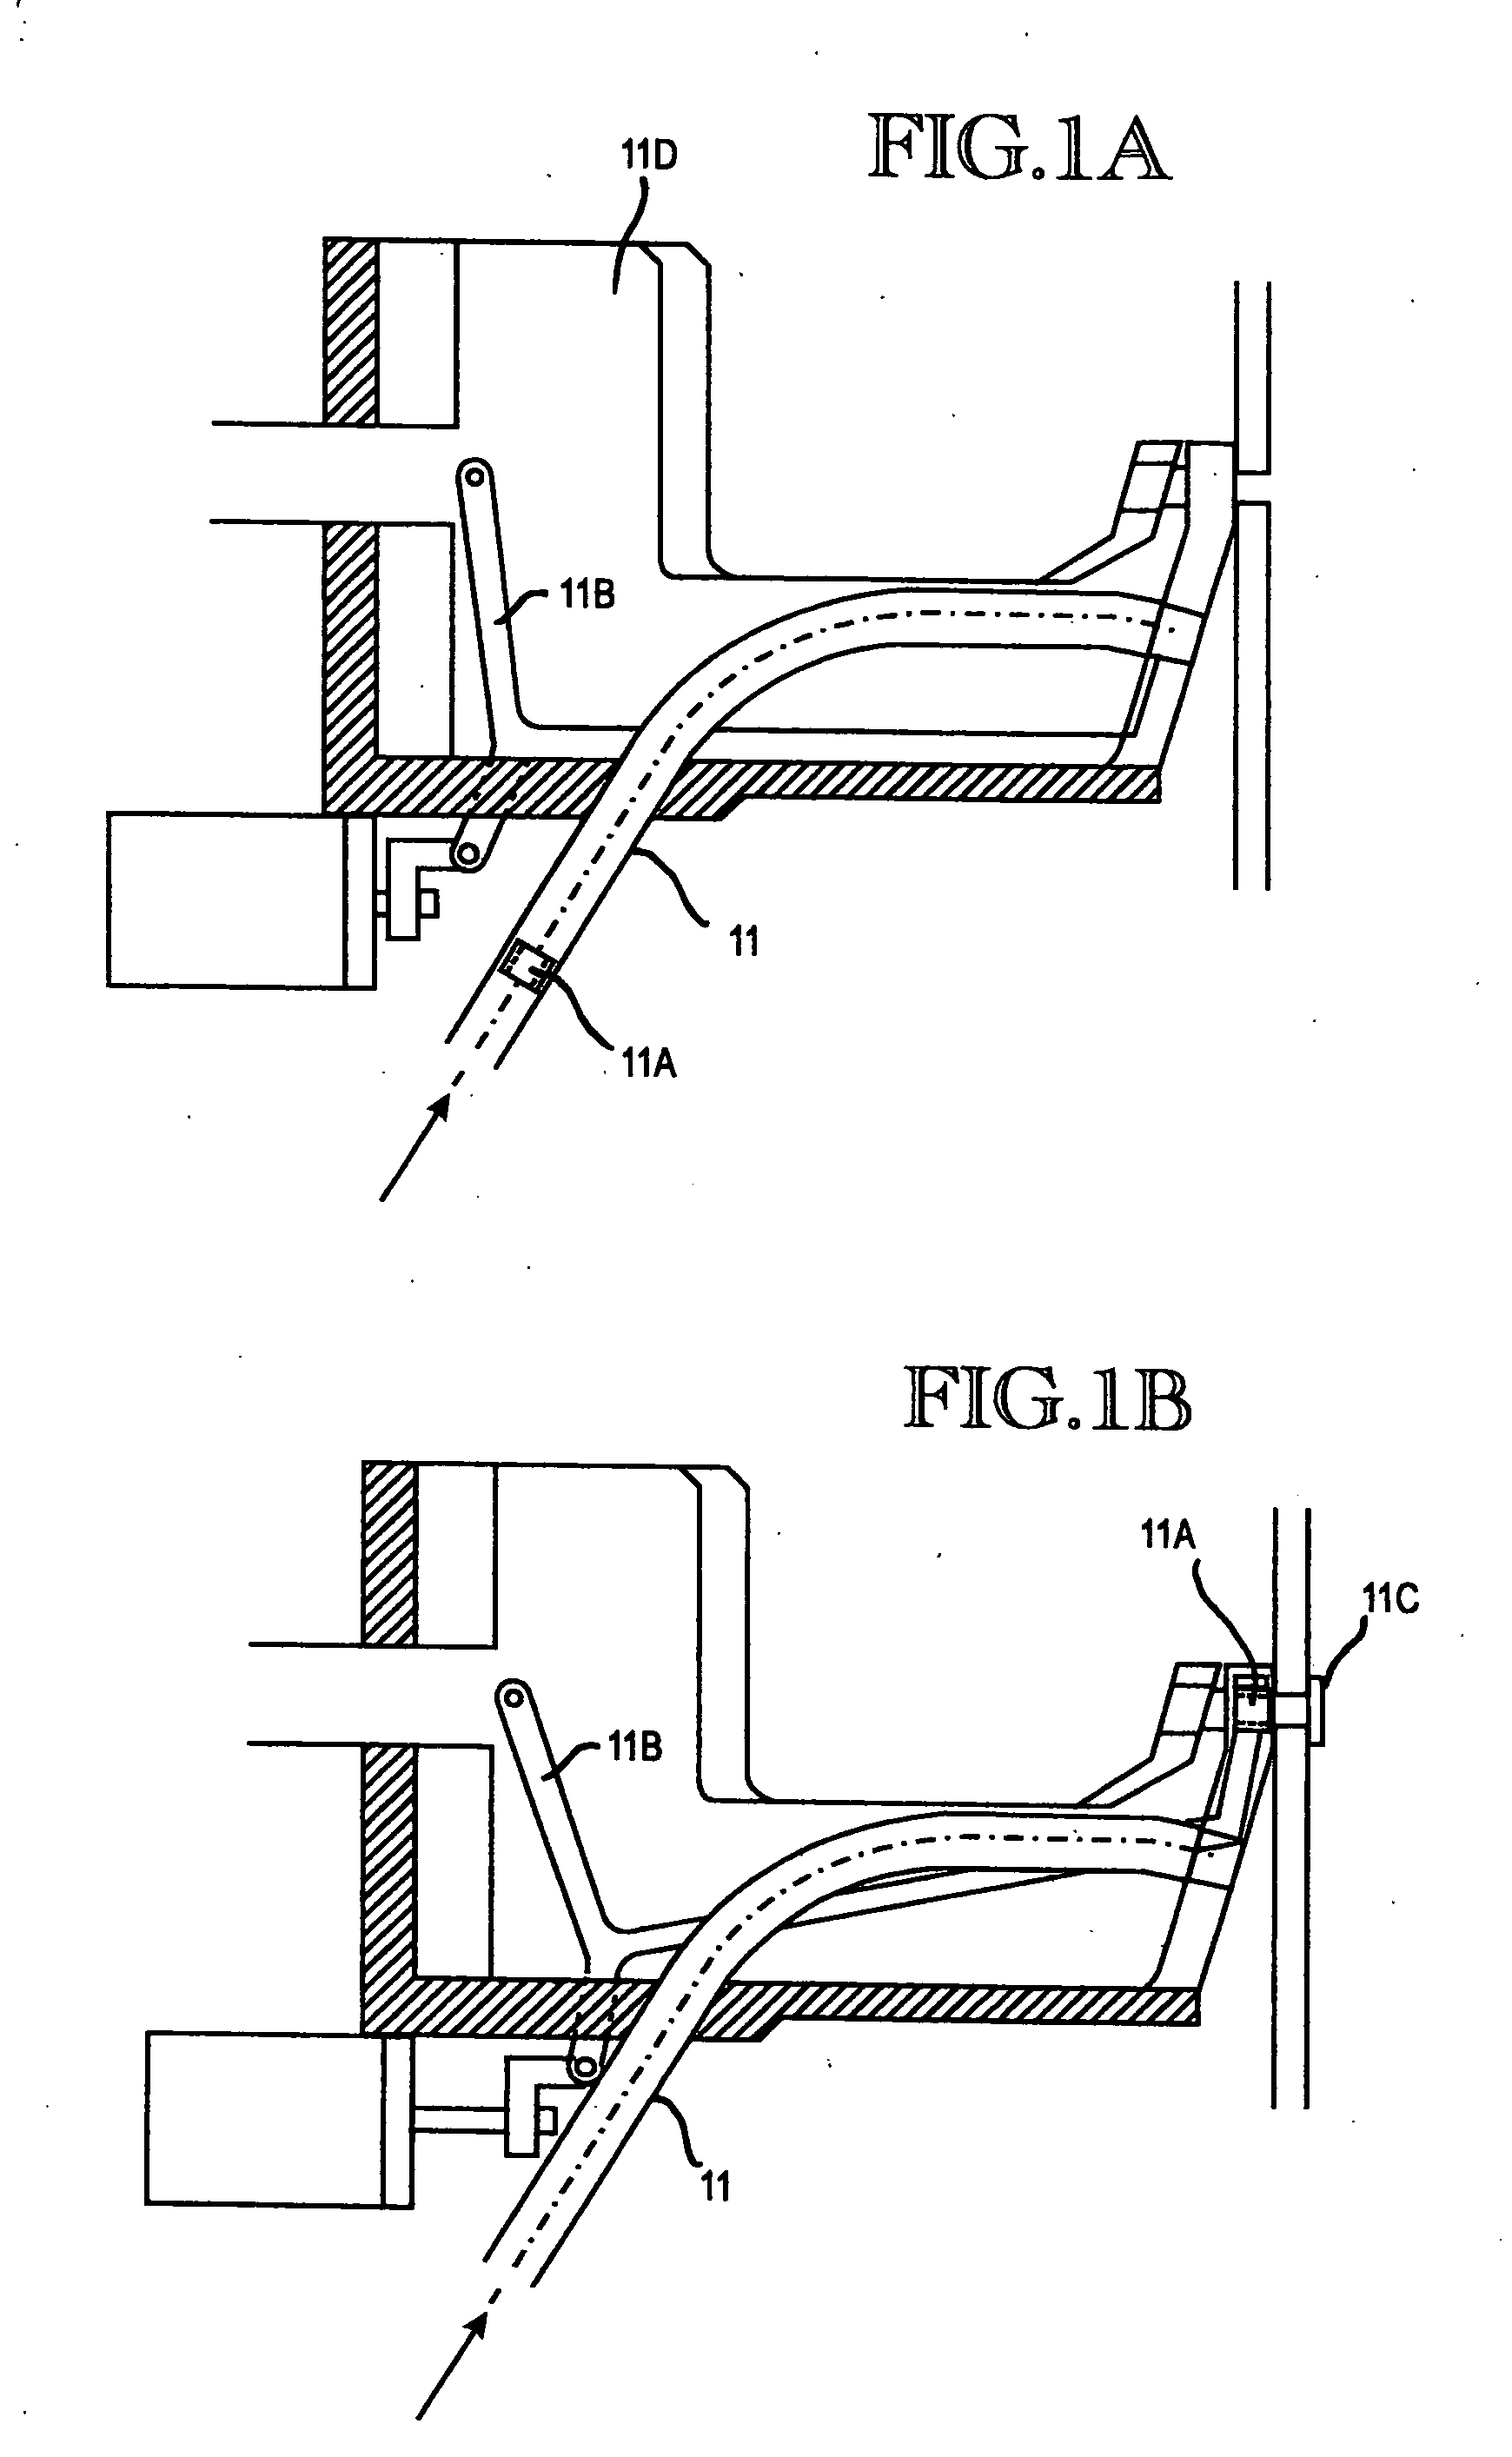 Self-aligning collar swaging system for airplane panel bolts